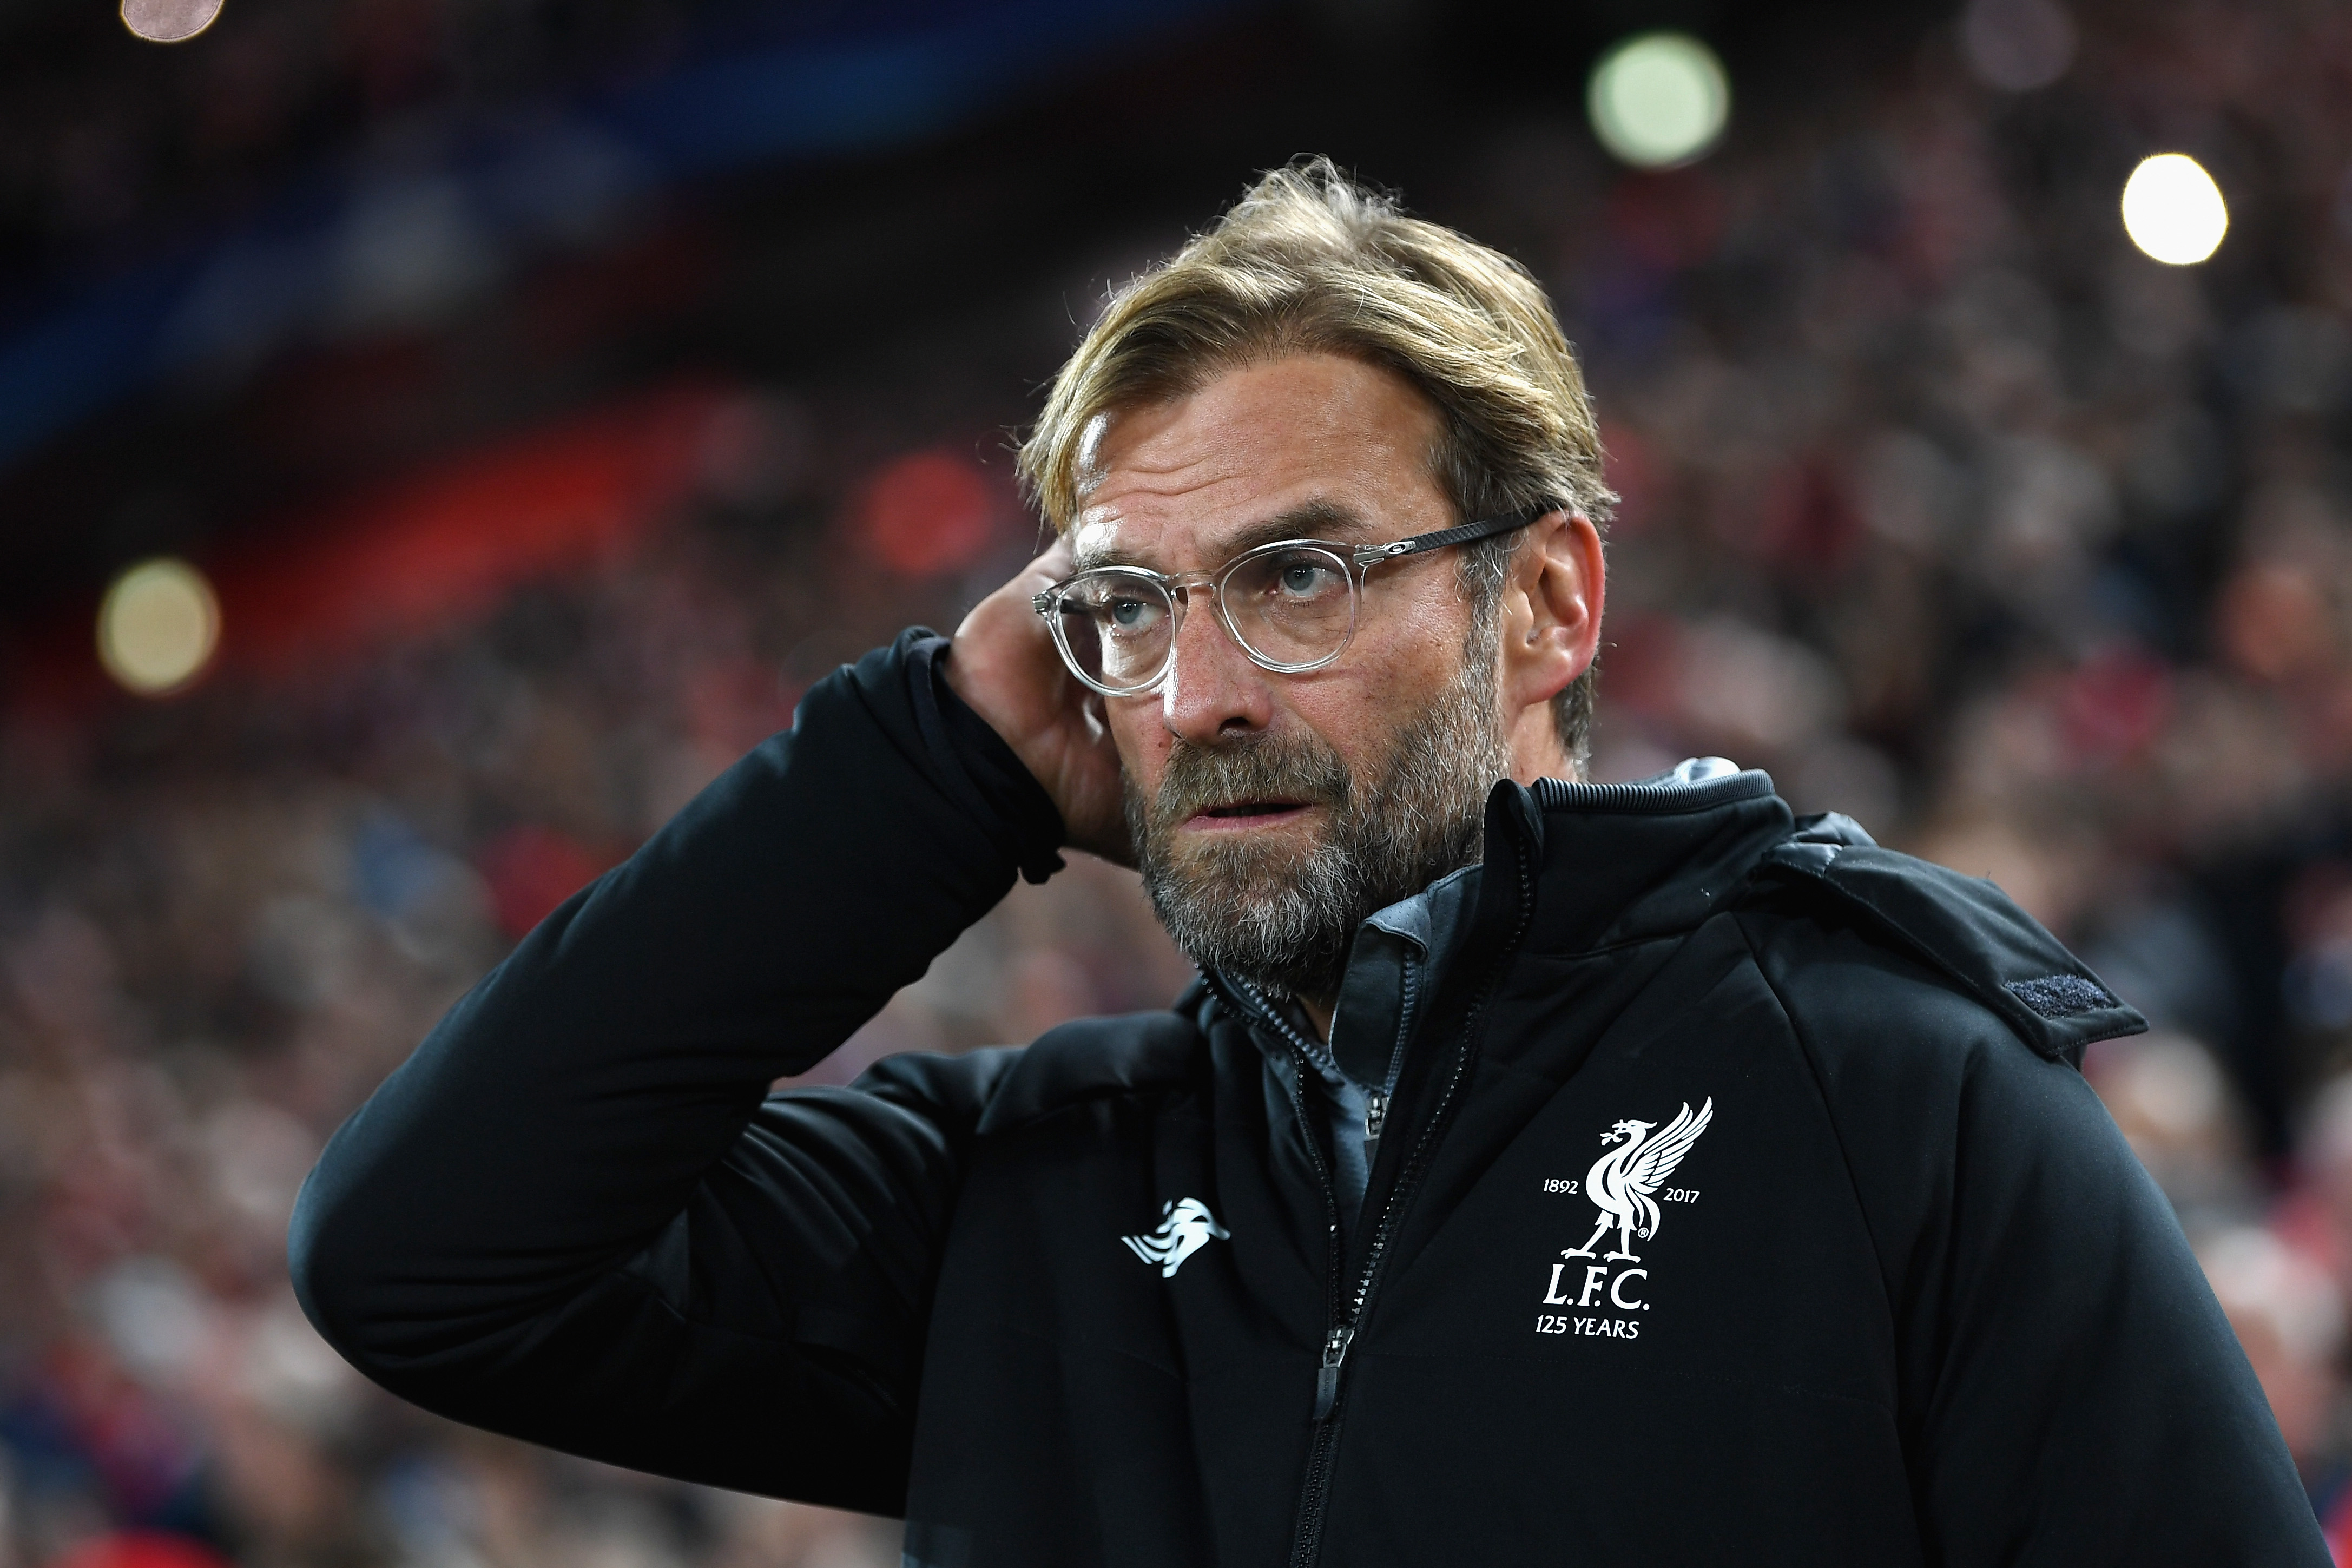 LIVERPOOL, ENGLAND - NOVEMBER 01:  Jurgen Klopp, Manager of Liverpool looks on prior to the UEFA Champions League group E match between Liverpool FC and NK Maribor at Anfield on November 1, 2017 in Liverpool, United Kingdom.  (Photo by Michael Regan/Getty Images)